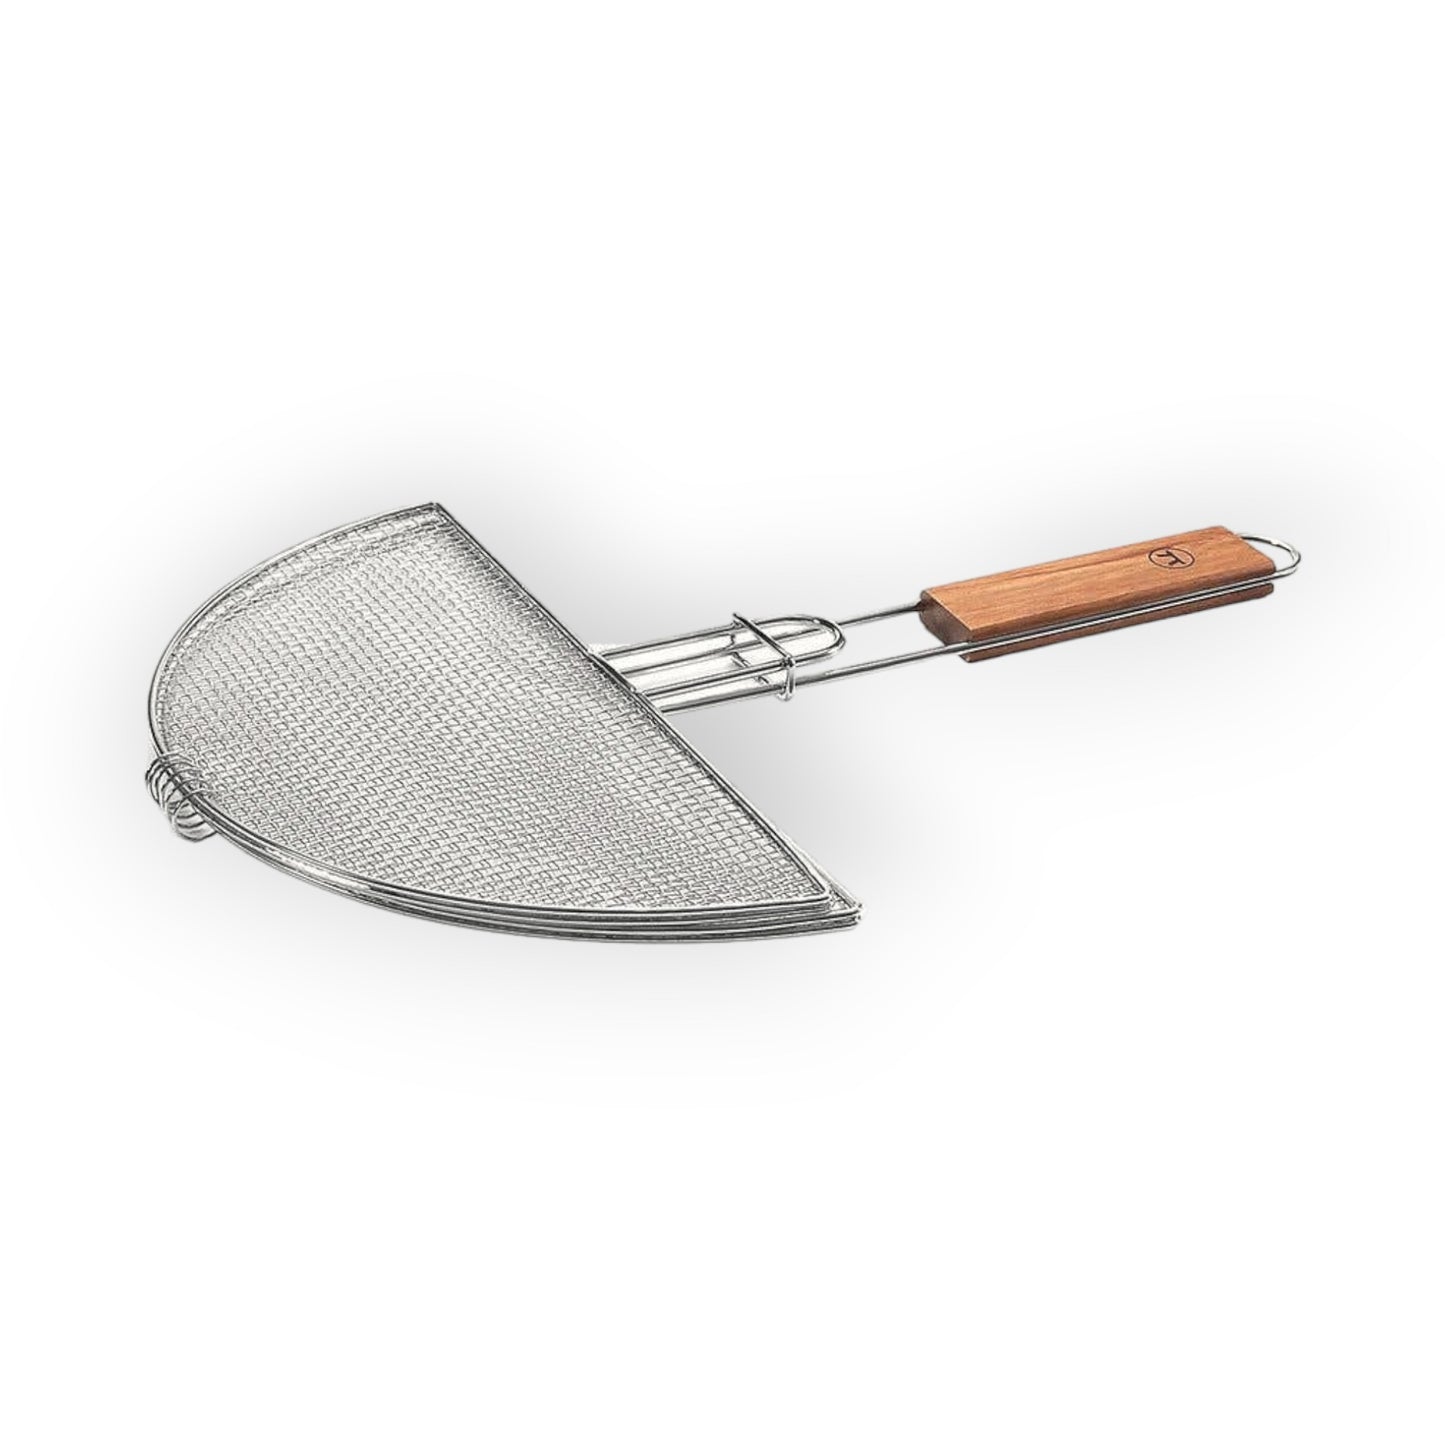 Half circle flat grilling basket for quesadillas, with a wood handle.